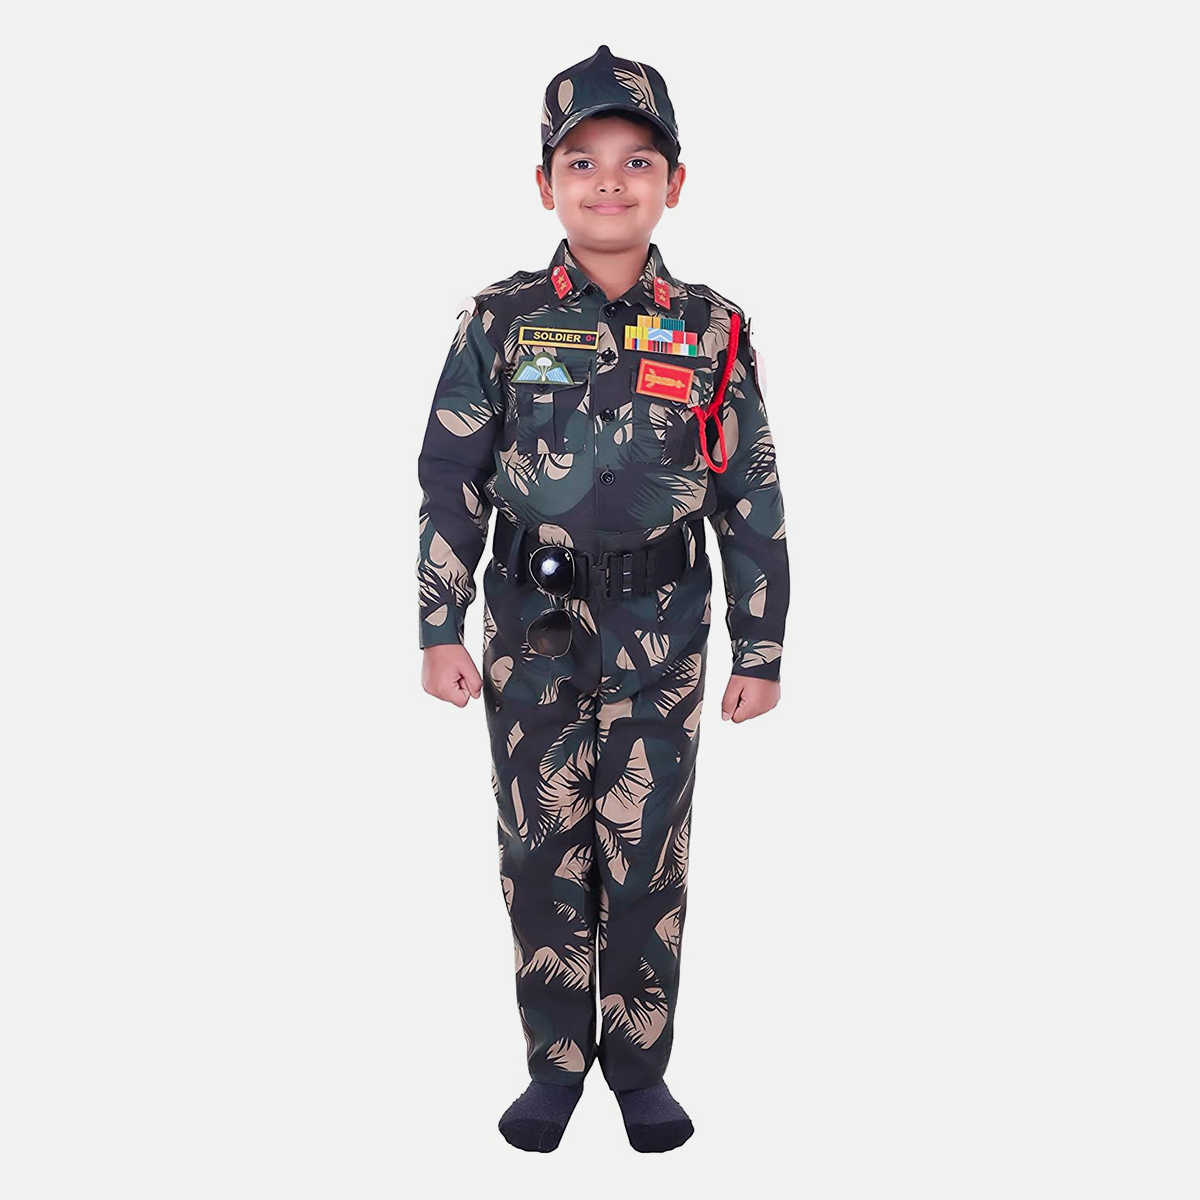 Army Dress for Kids, Jungle Print Costume for Republic Day, pecial Badges, Cap, Lanyard, 3Y